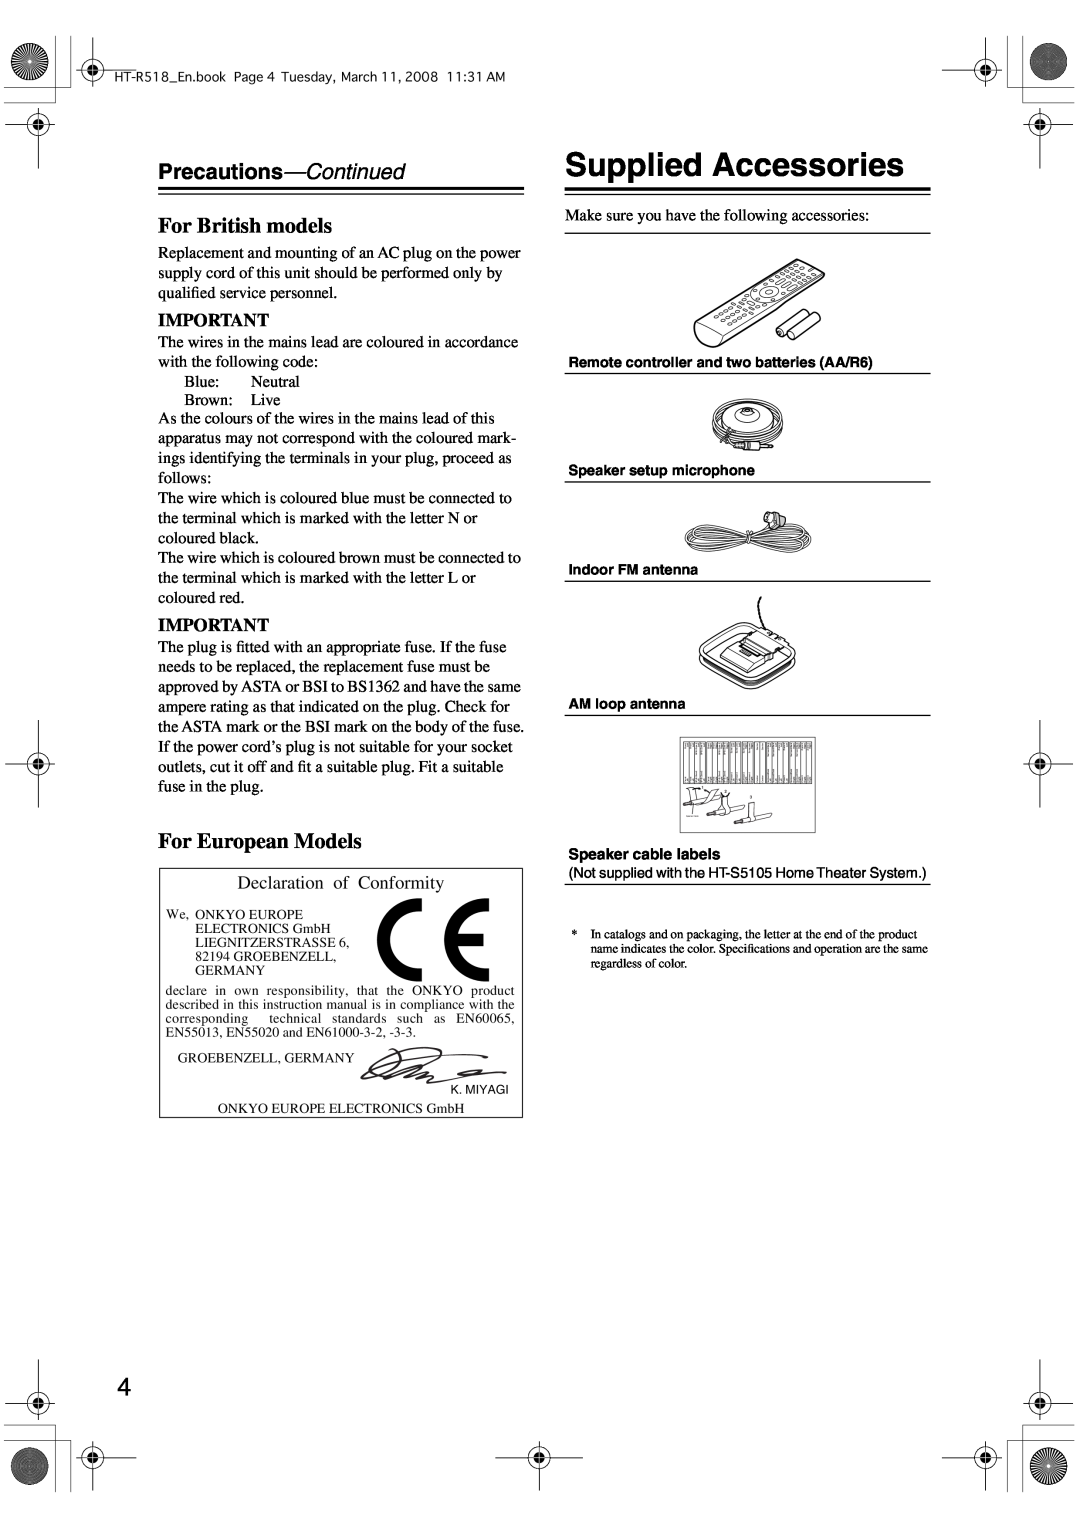 Onkyo HT-R518 instruction manual Supplied Accessories, Precautions-Continued, For British models, For European Models 